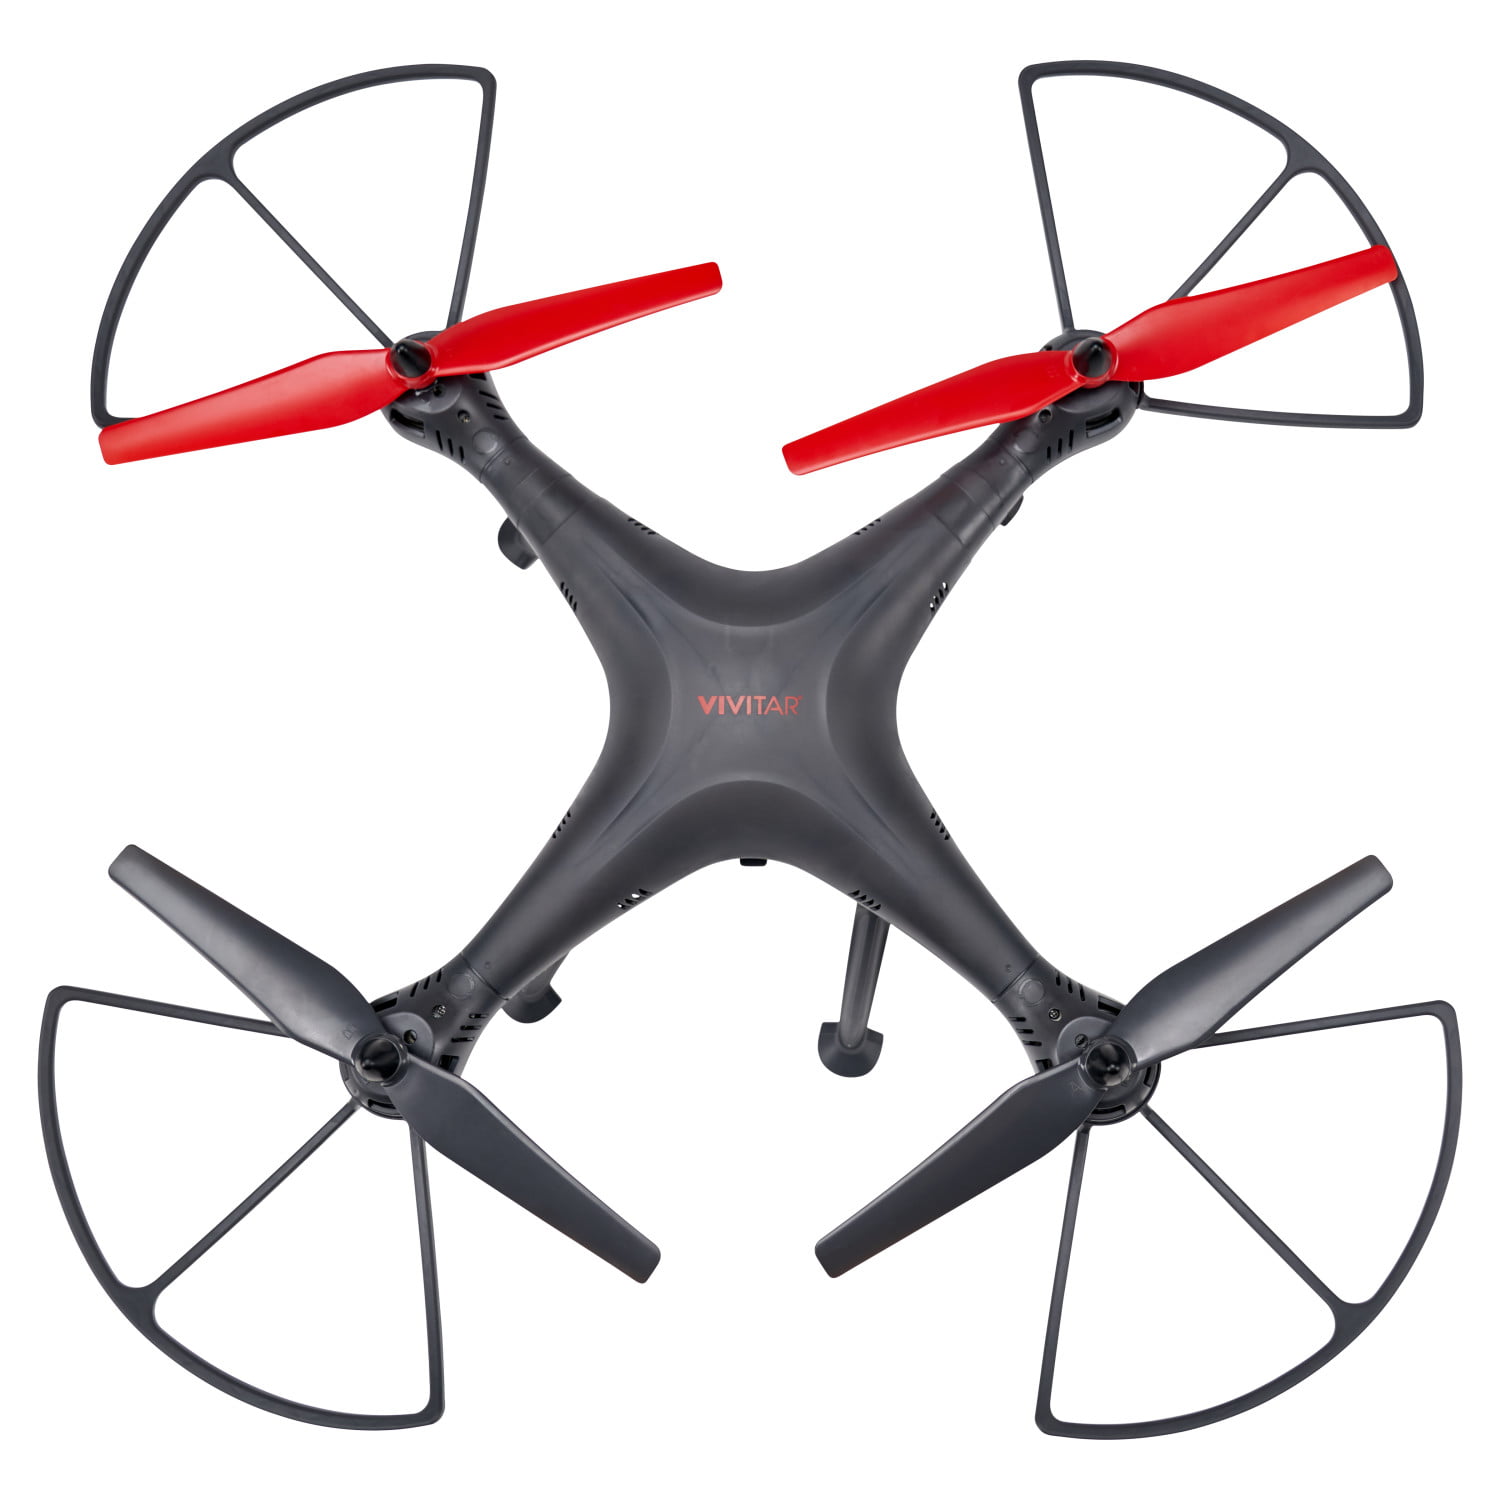 Vivitar Aeroview Quadcopter Wide Angle Video Drone with Wifi, GPS, 12 Minute flight time and range of 1000 feet - Walmart.com